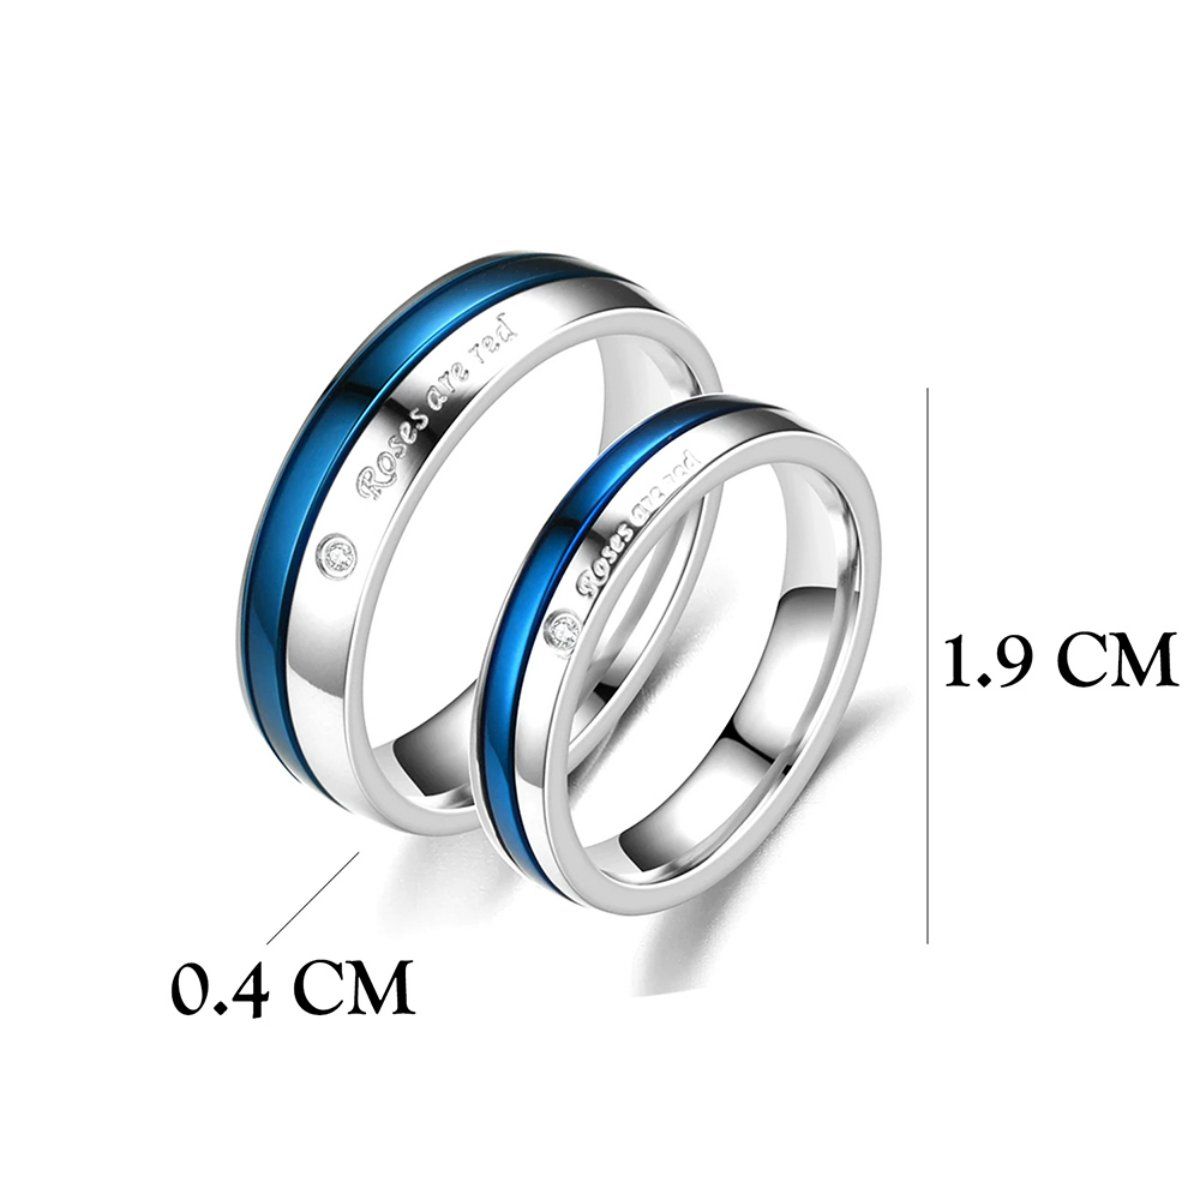 Dsnyu 6MM Silver Wedding Band Blue Center Engagement Ring for Men Women  Comfort Fit Size, Men Women Stainless Steel Statement Ring High Polish Blue  Line, Size 6 | Amazon.com